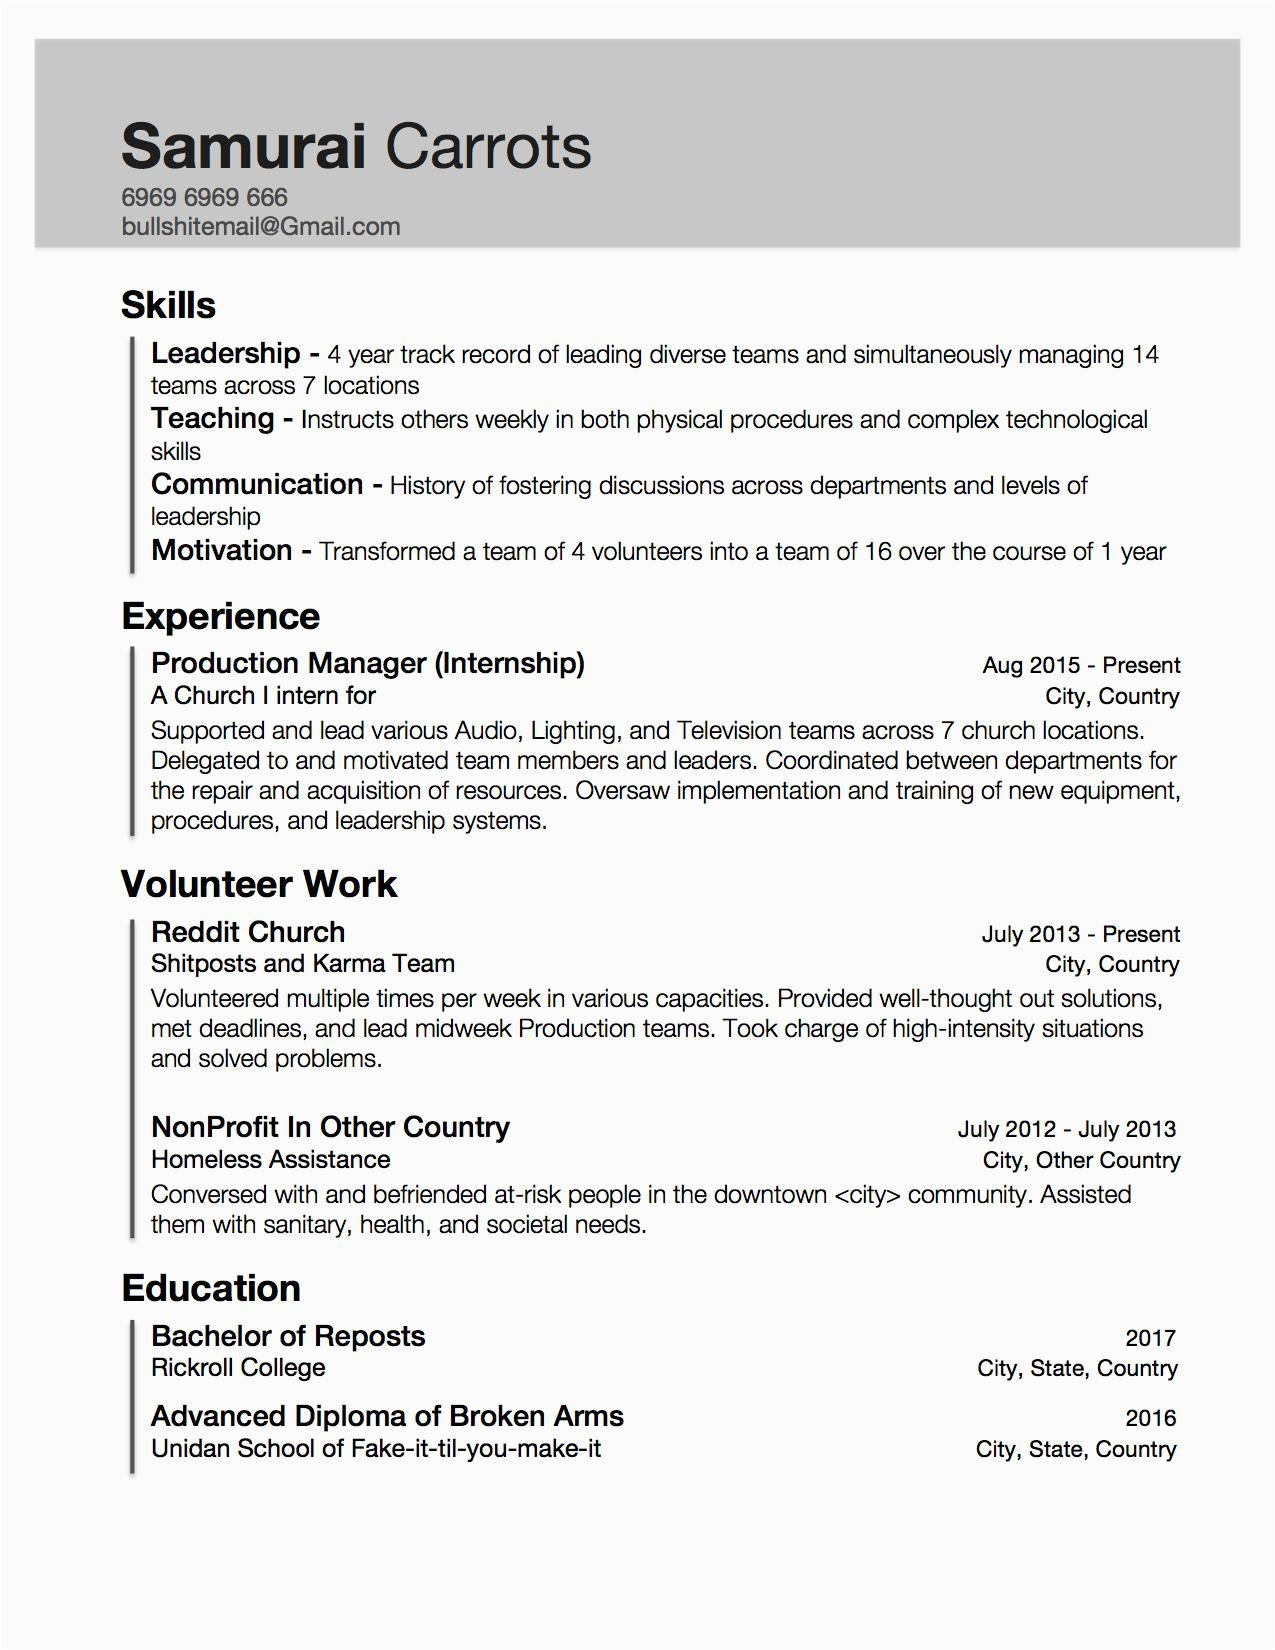 Resume Samples for 19 Year Old with Almost No Experience How to Write A Resume with No Experience Reddit Best Resume Examples